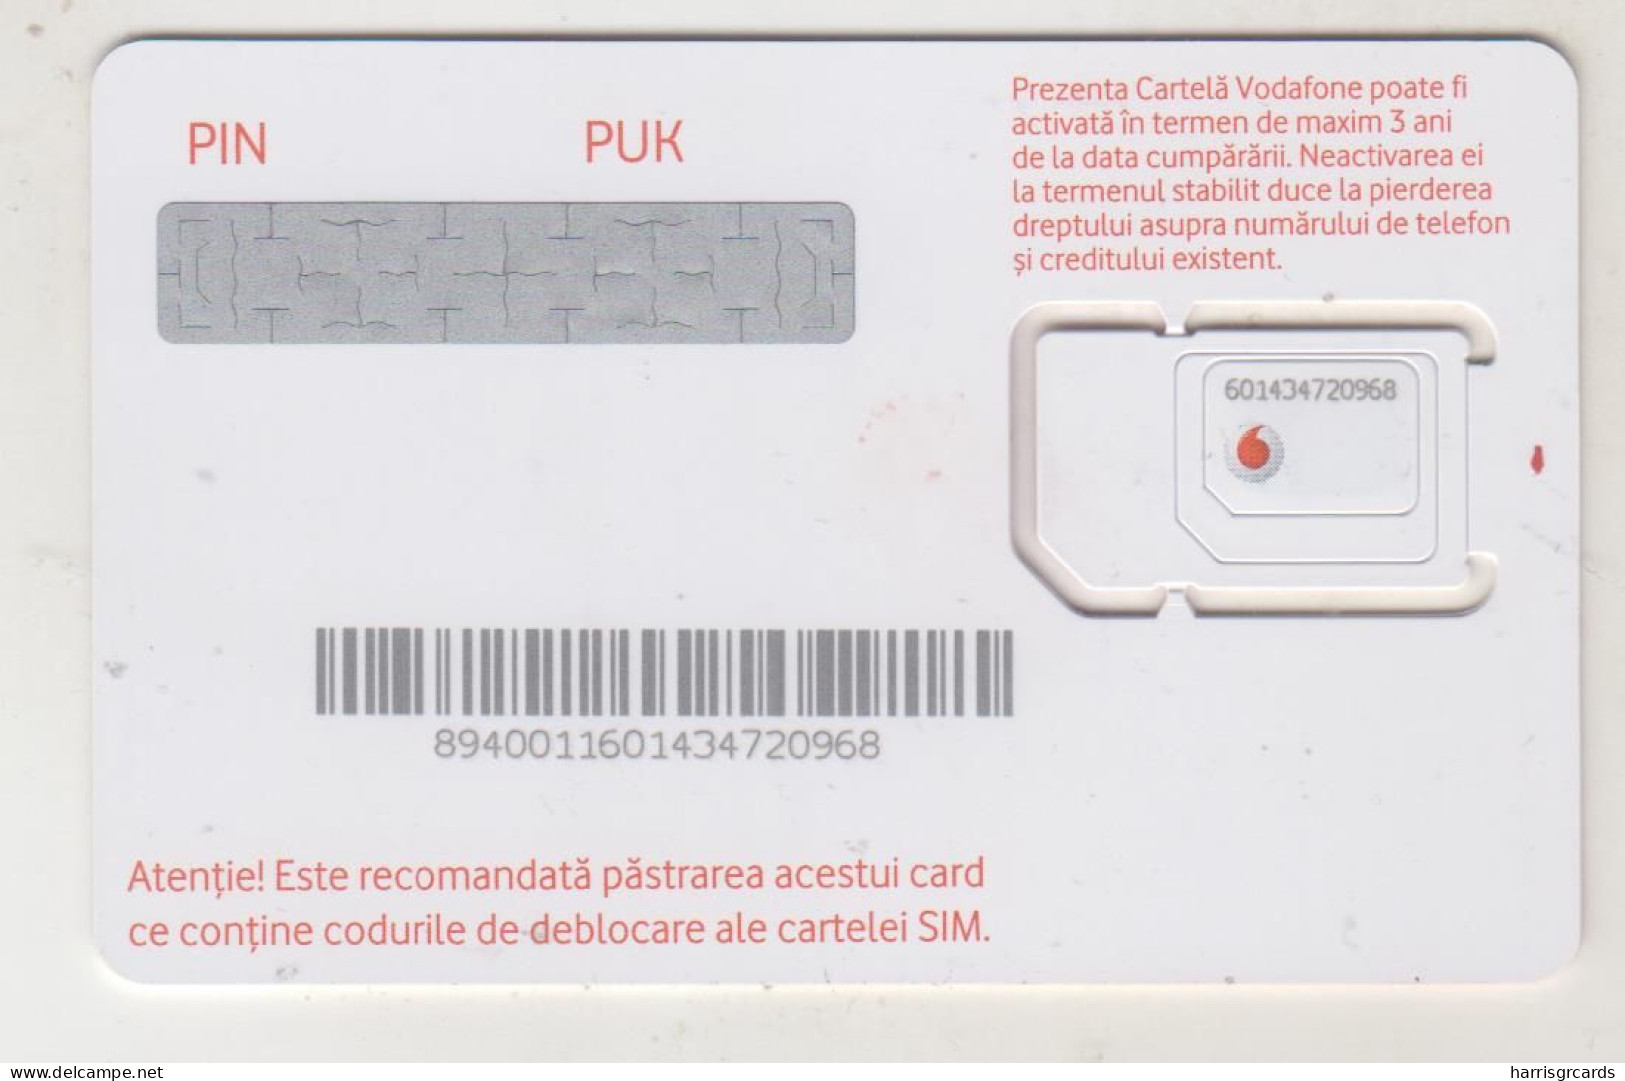 ROMANIA - Power To You (With SIM Images), Vodafone GSM Card, Mint - Romania